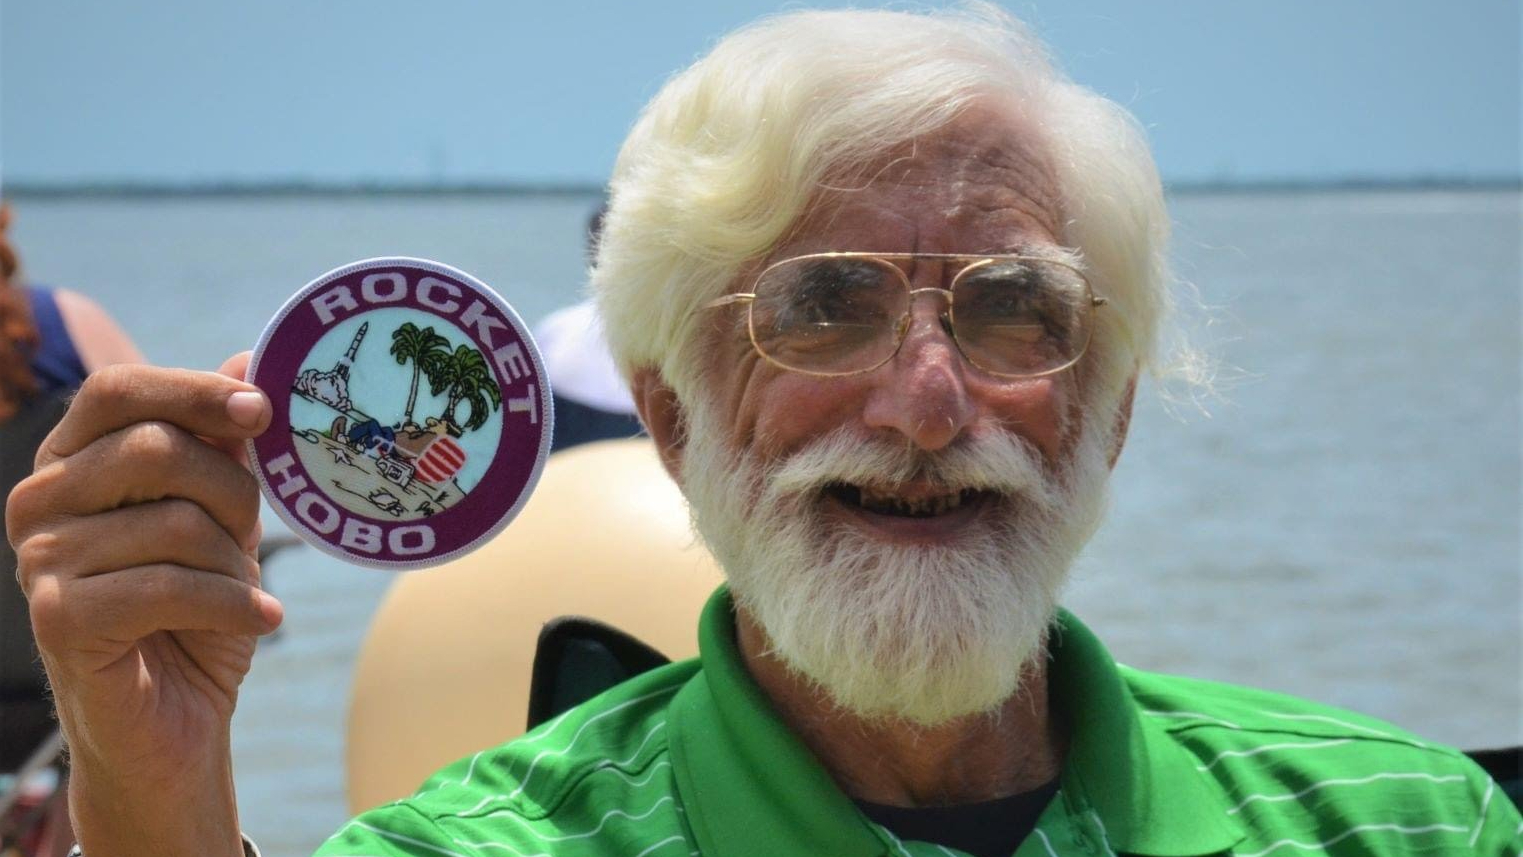 Ozzie Osband, Originator of “3-2-1” Telephone Area Code and “Rocket Hobo,” Passes Away at 72